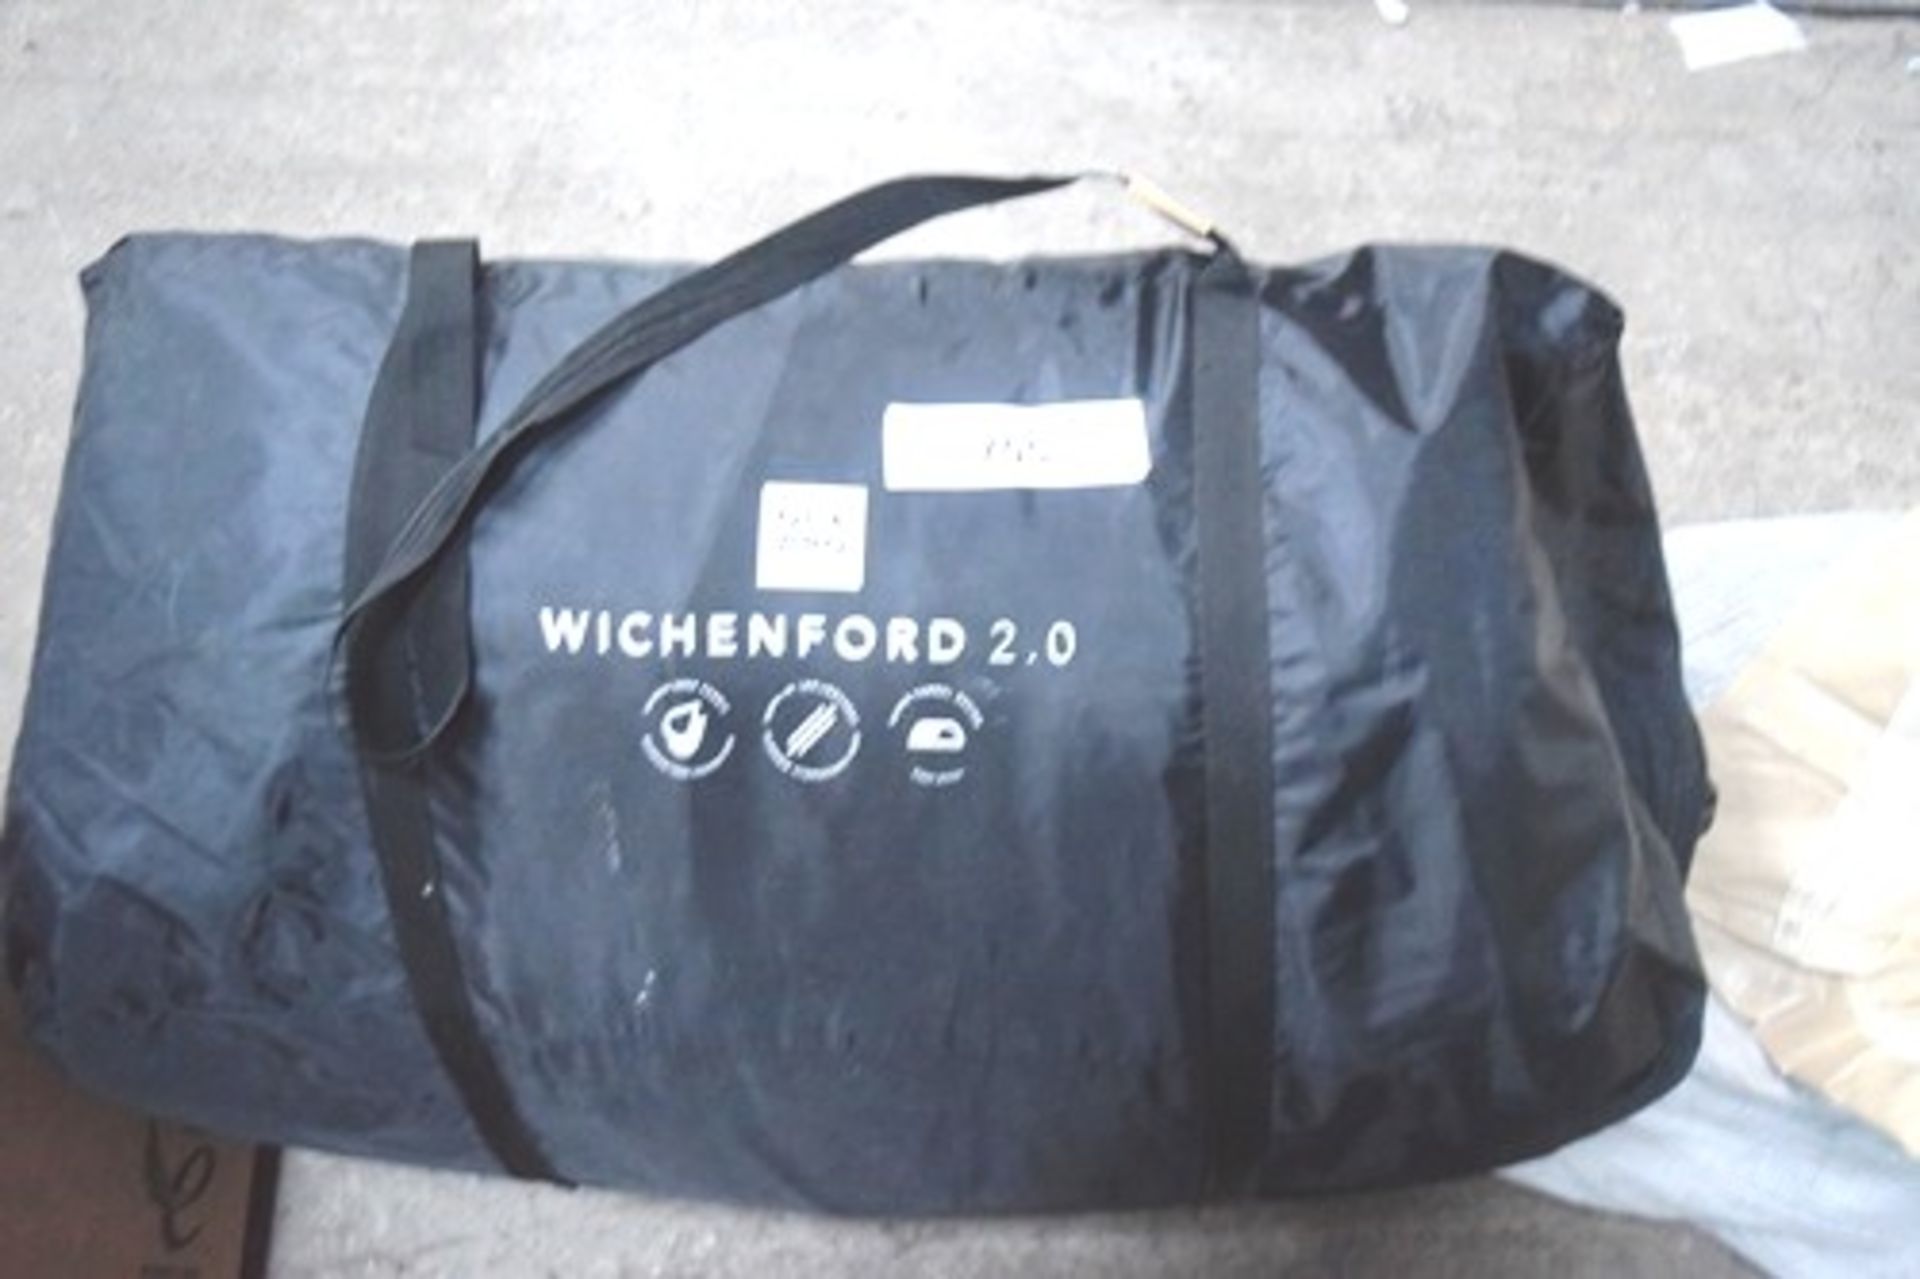 1 x OLPRO Wichenford 2.0 - Second-hand (GS21)